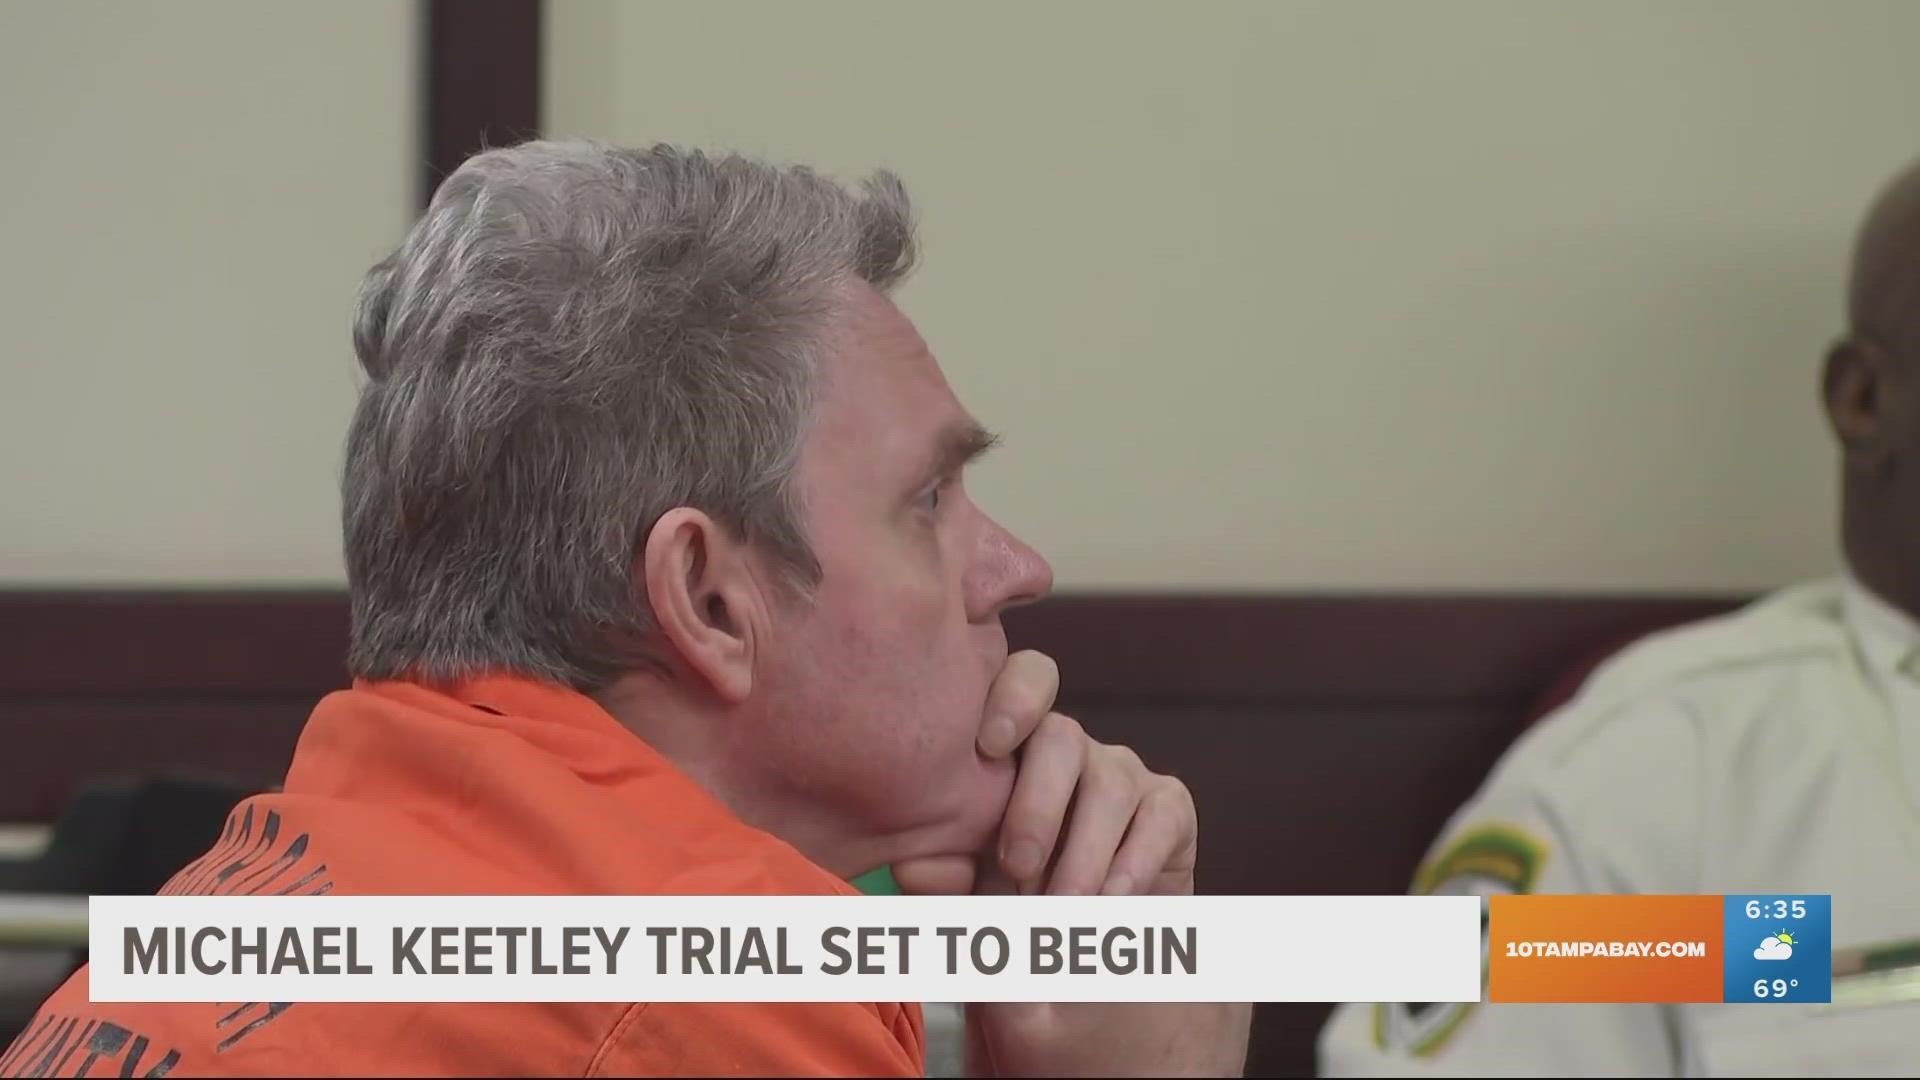 Michael Keetley is accused of killing two men outside a home in Ruskin on Thanksgiving Day. He has been held in jail for 12 years and maintains his innocence.